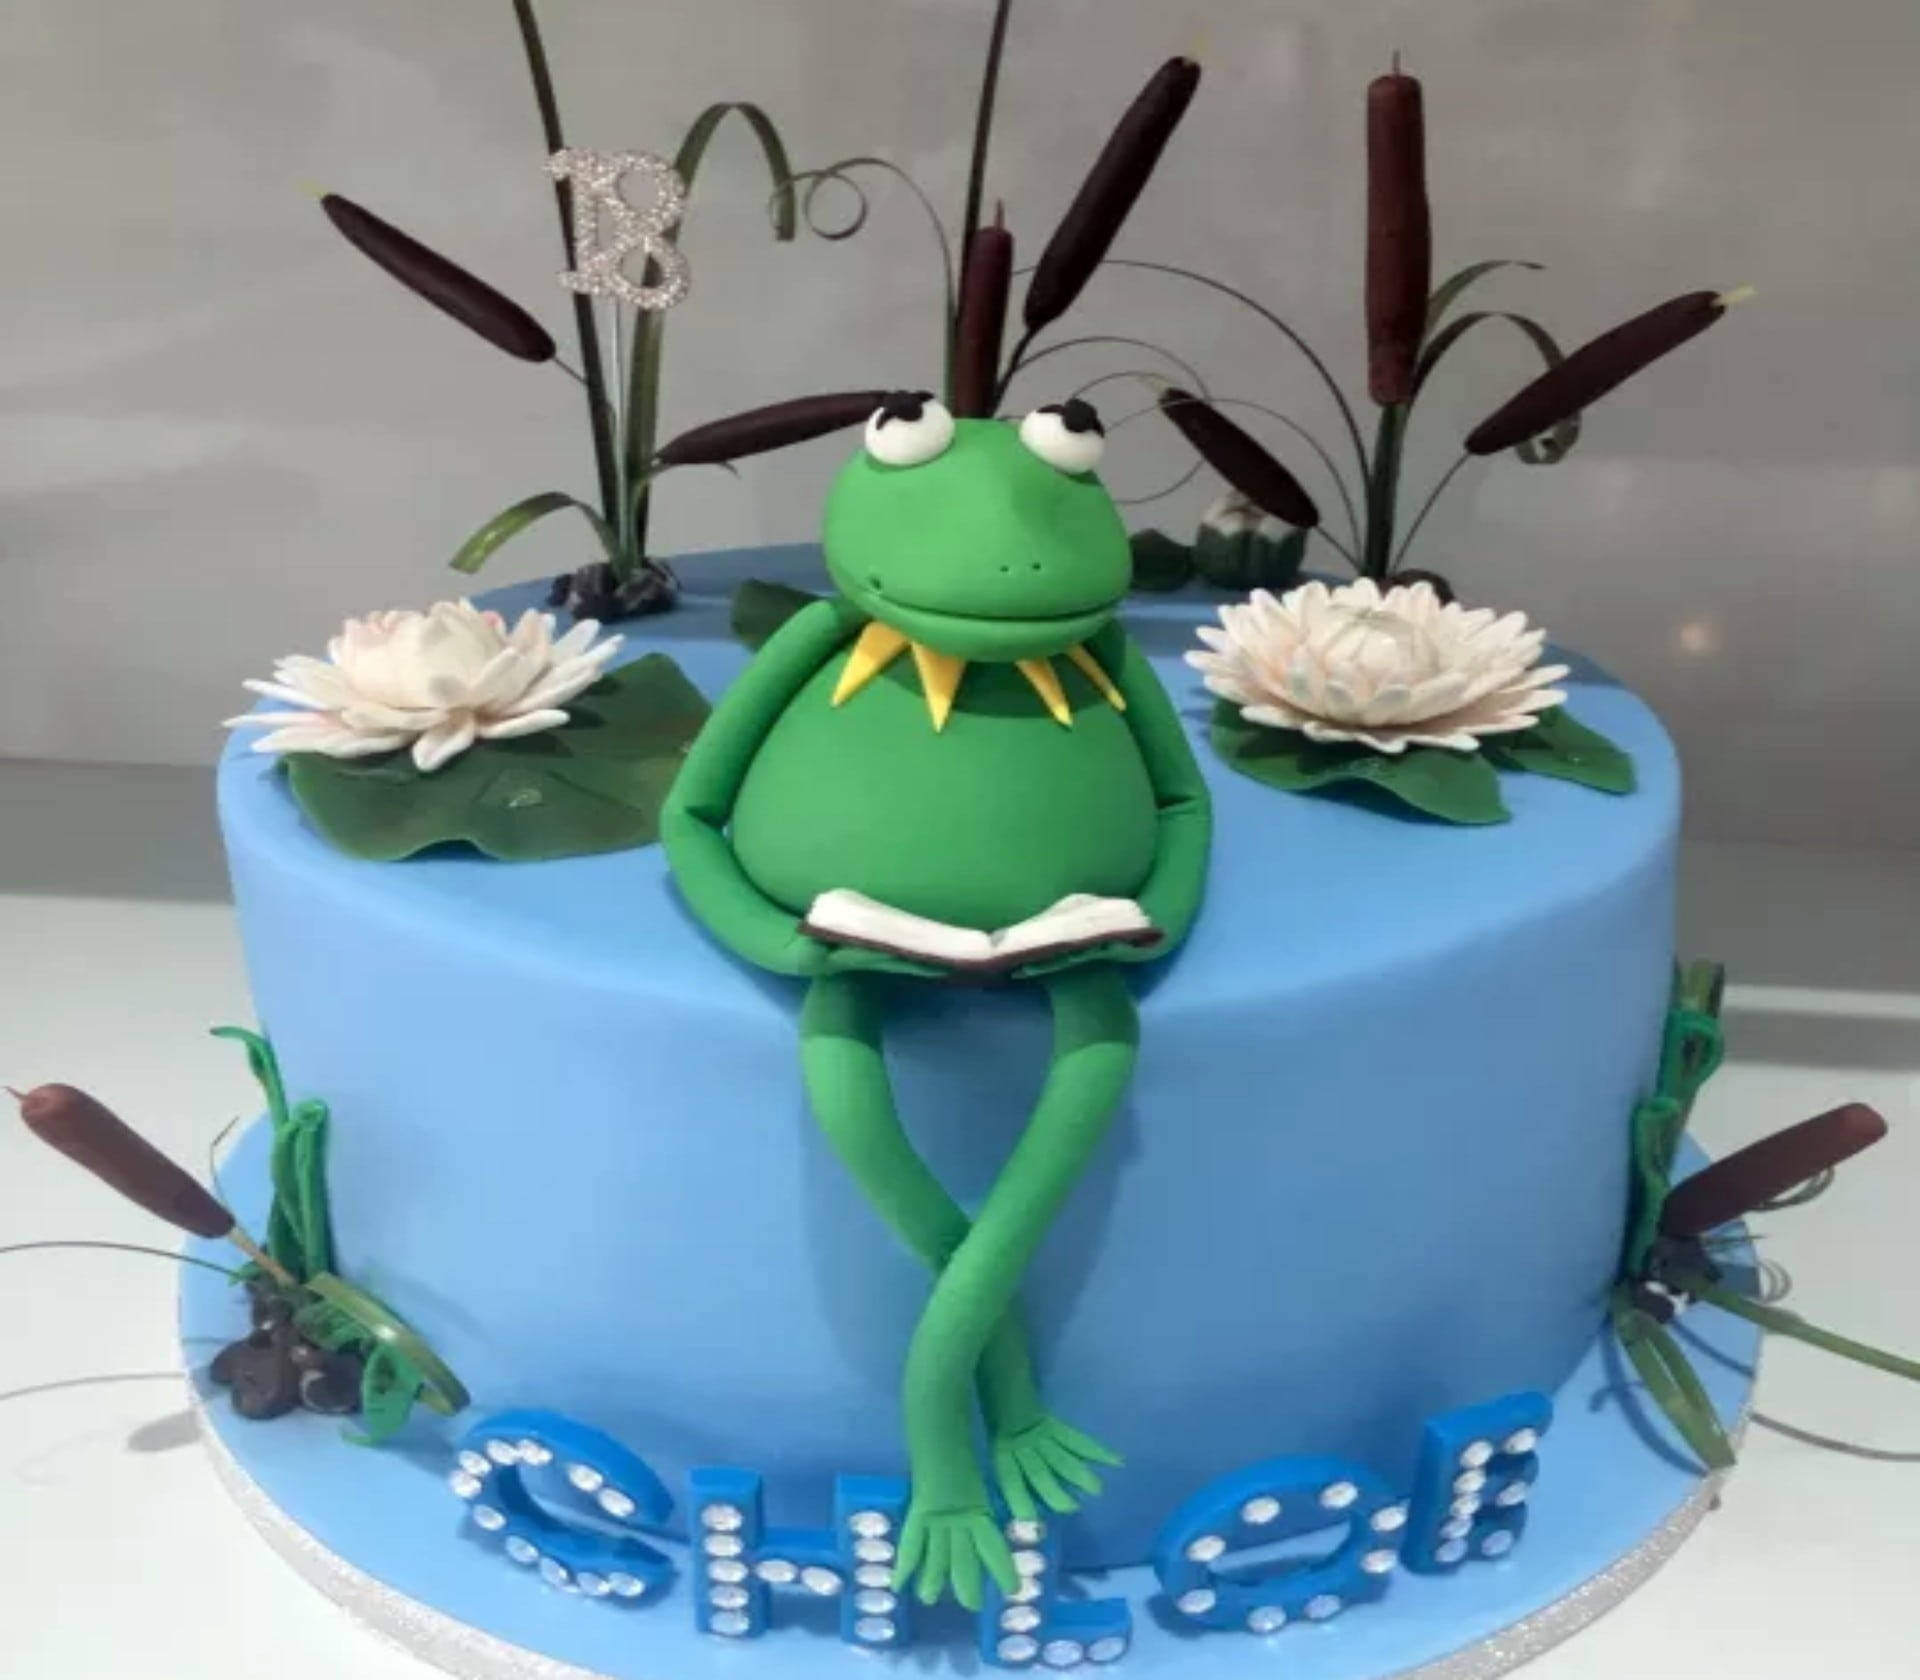 Delightful Kermit The Frog Cake Topper From The Muppets